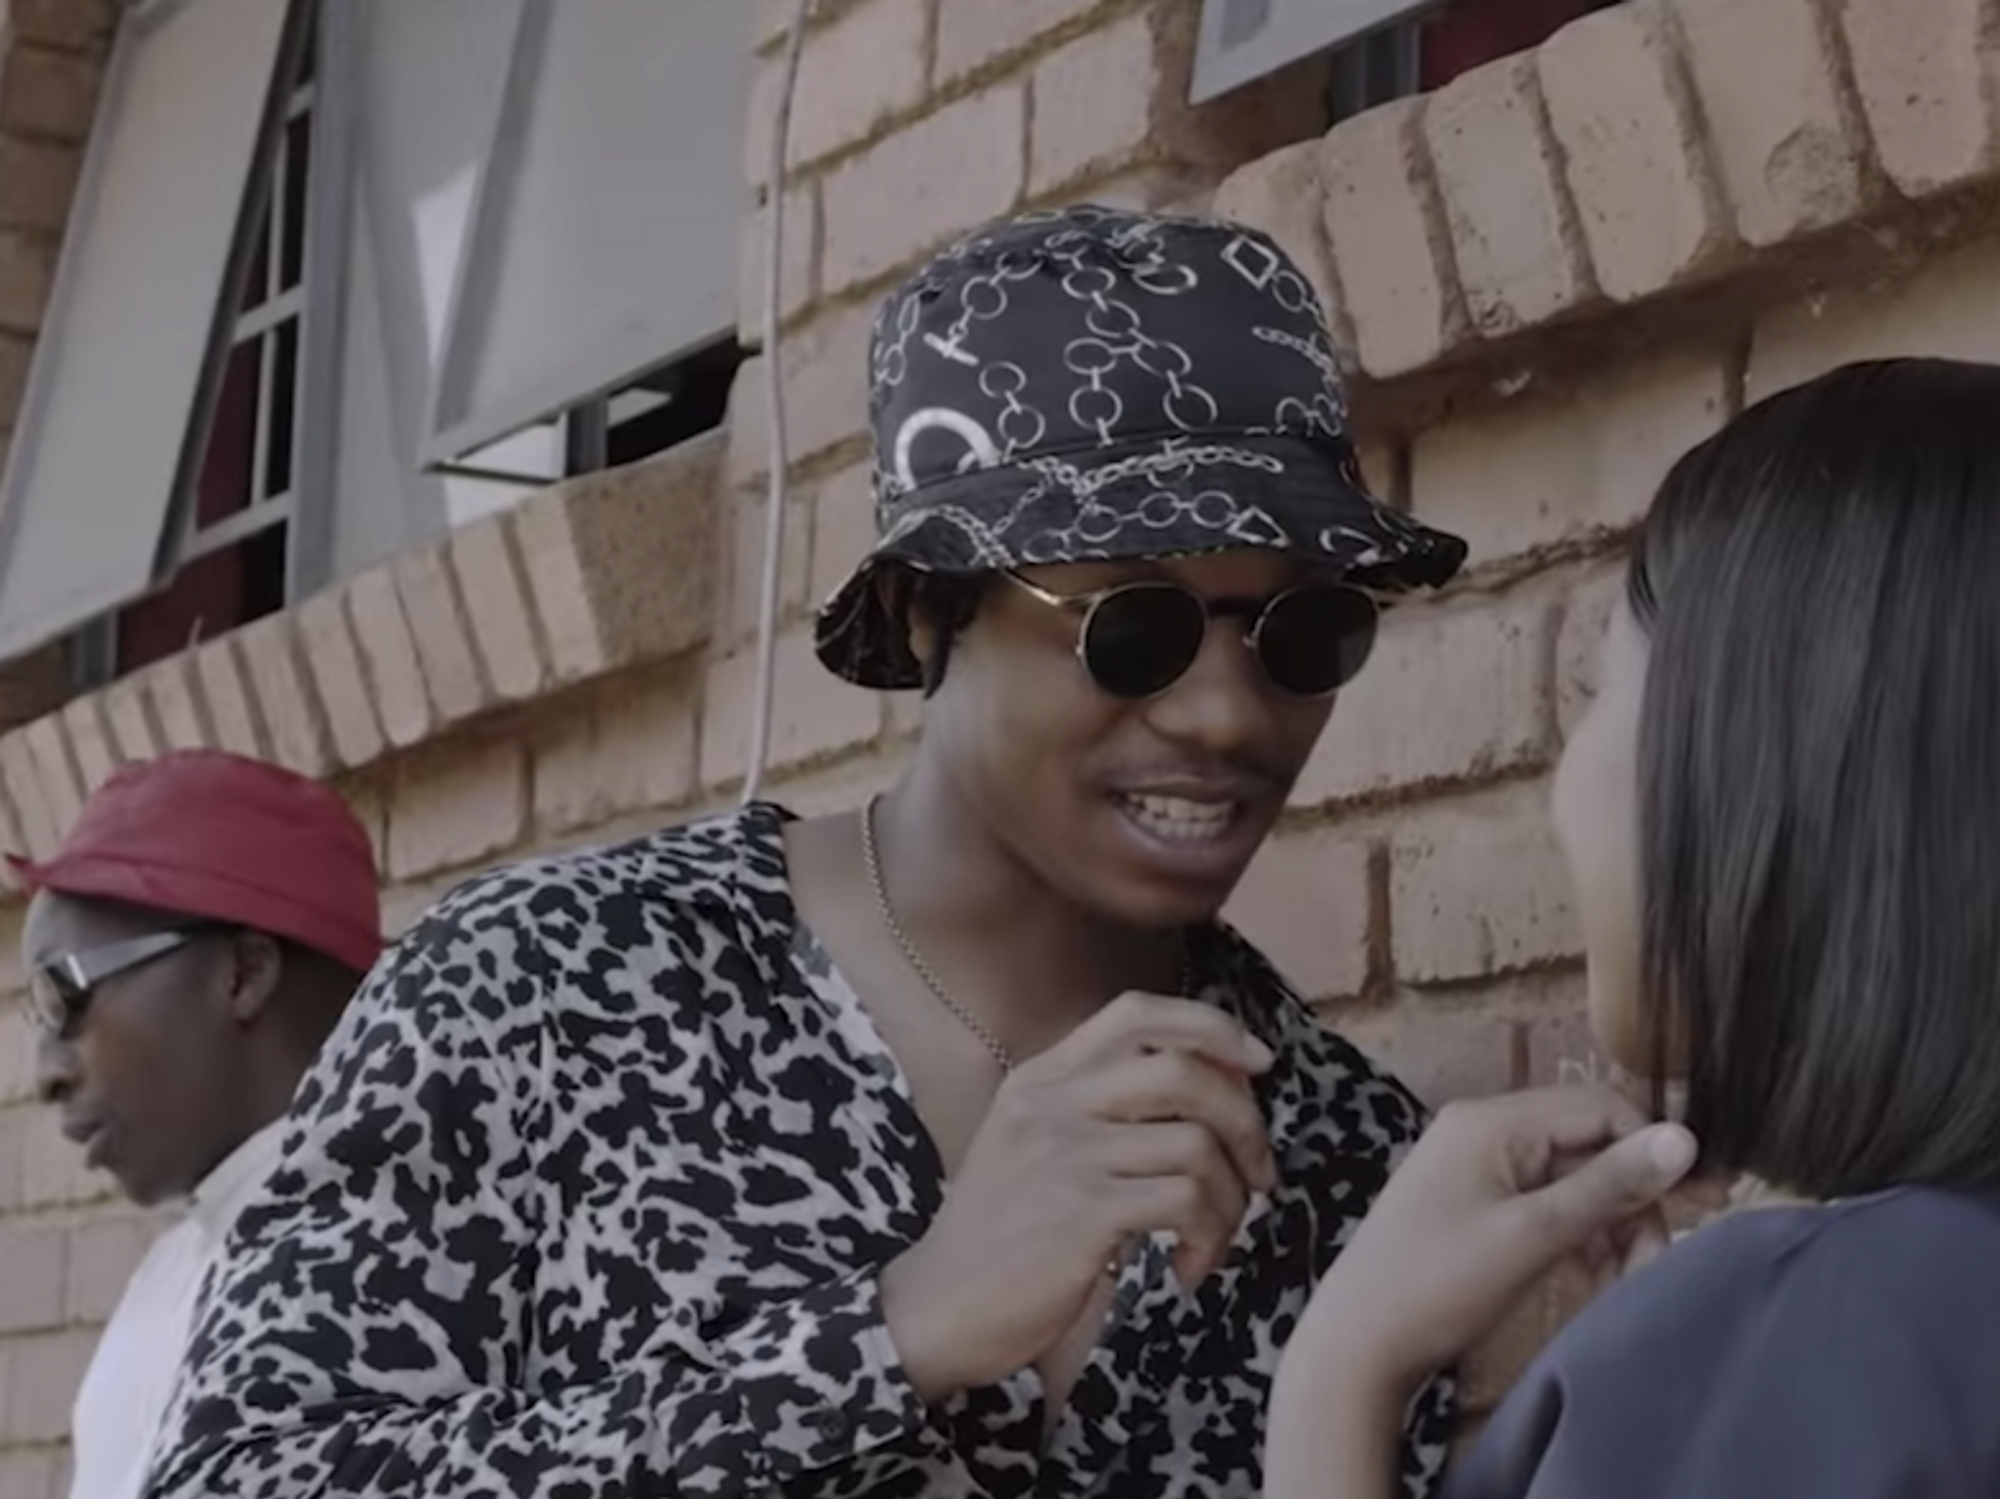 Sliqe and Kwesta Reference ‘Yizo Yizo’ in Their Video for ‘Spaan Saam’